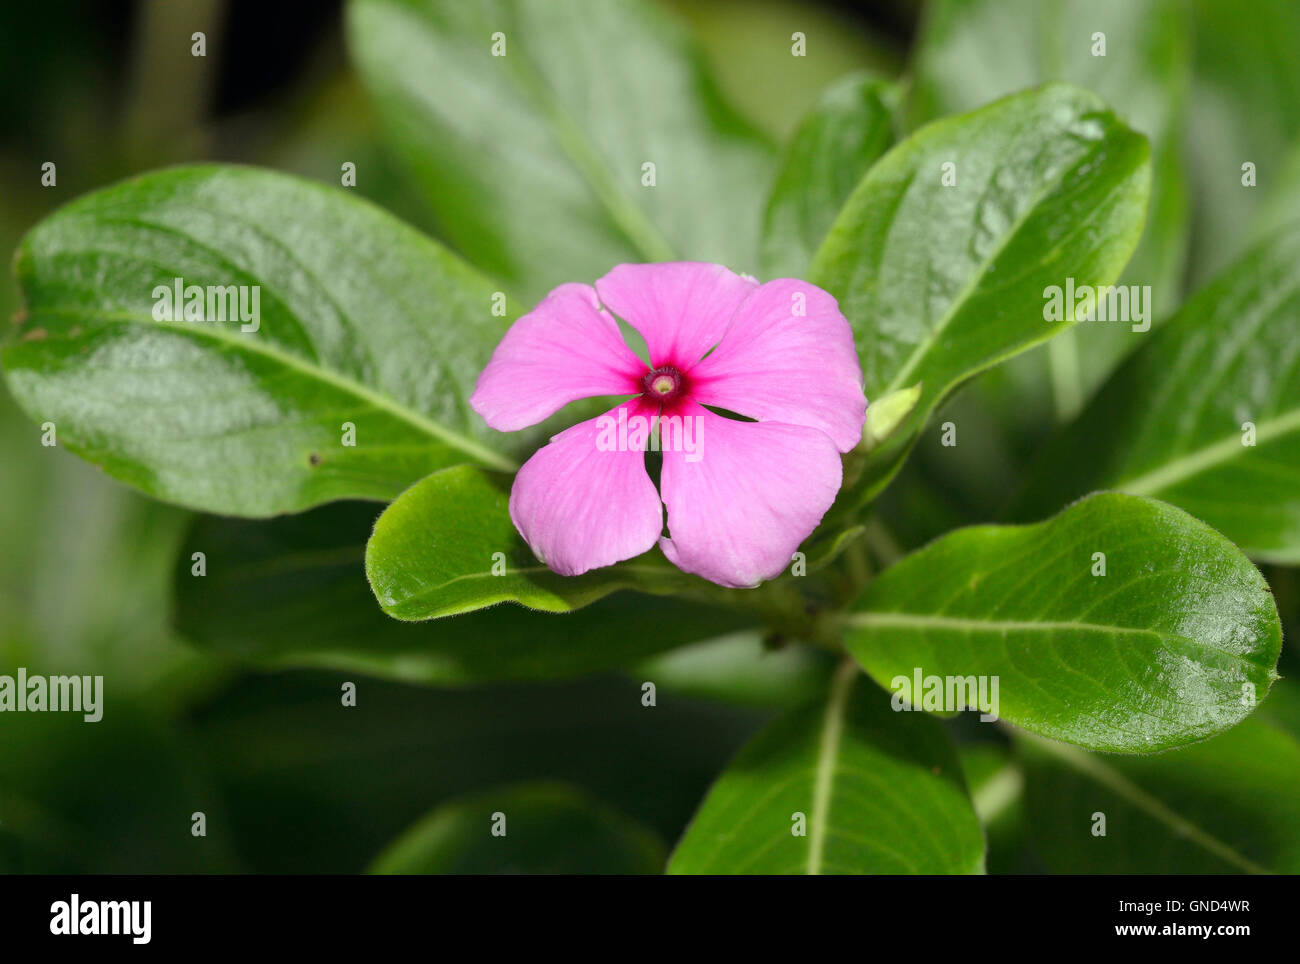 Madagascar or Rosy Periwinkle - Catharanthus roseus Source of the drugs vincristine and vinblastine, used to treat cancer Stock Photo